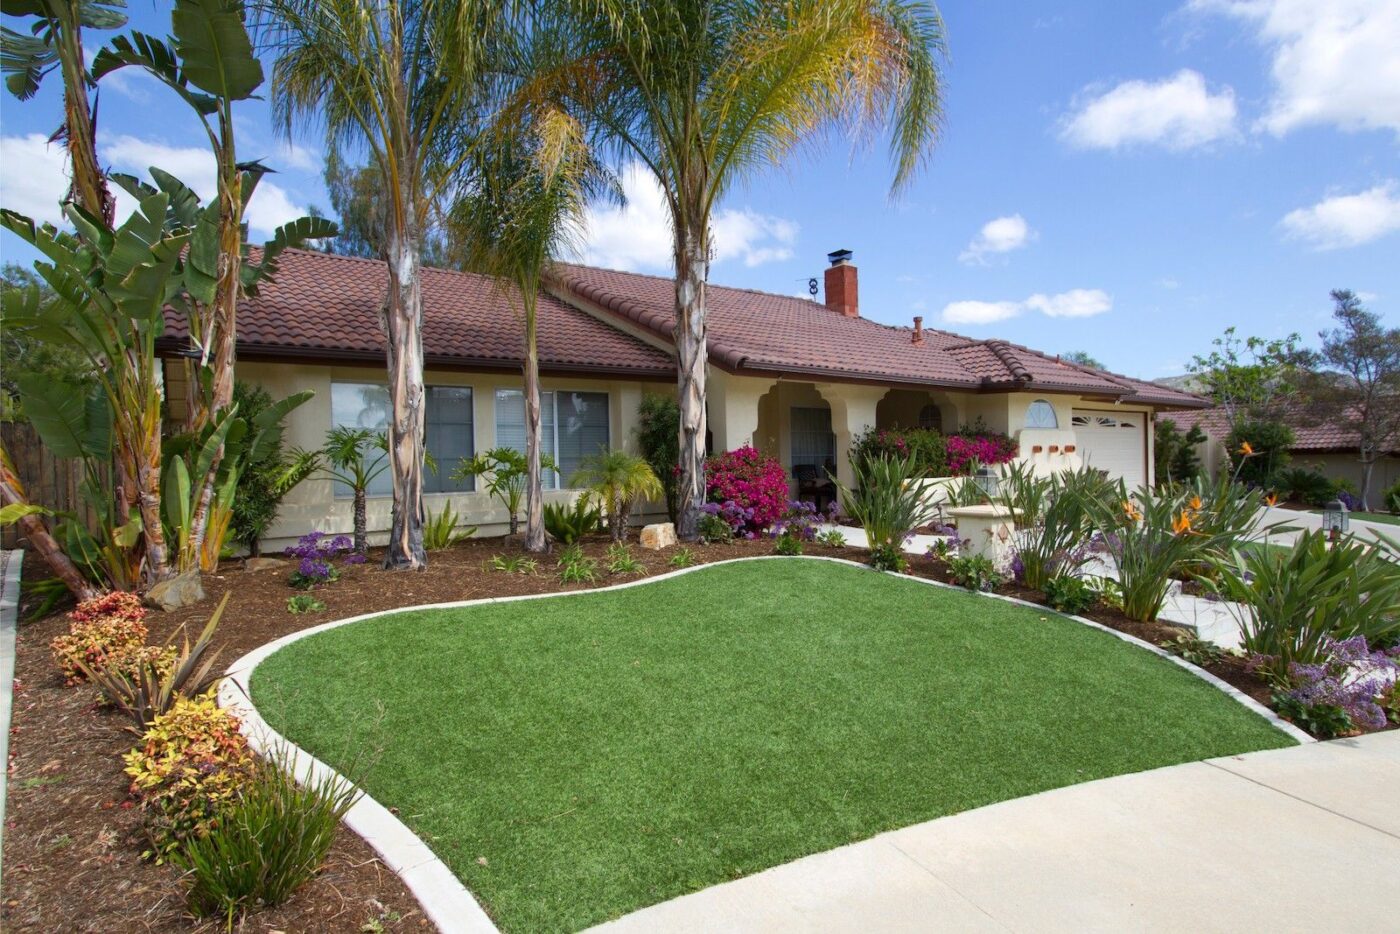 A single-story house with a red-tiled roof, palm trees, and a well-maintained front yard featuring lush green artificial grass, various plants, and flowers. A curved concrete driveway leads to a two-car garage. The sky is partly cloudy over Neptune Beach.